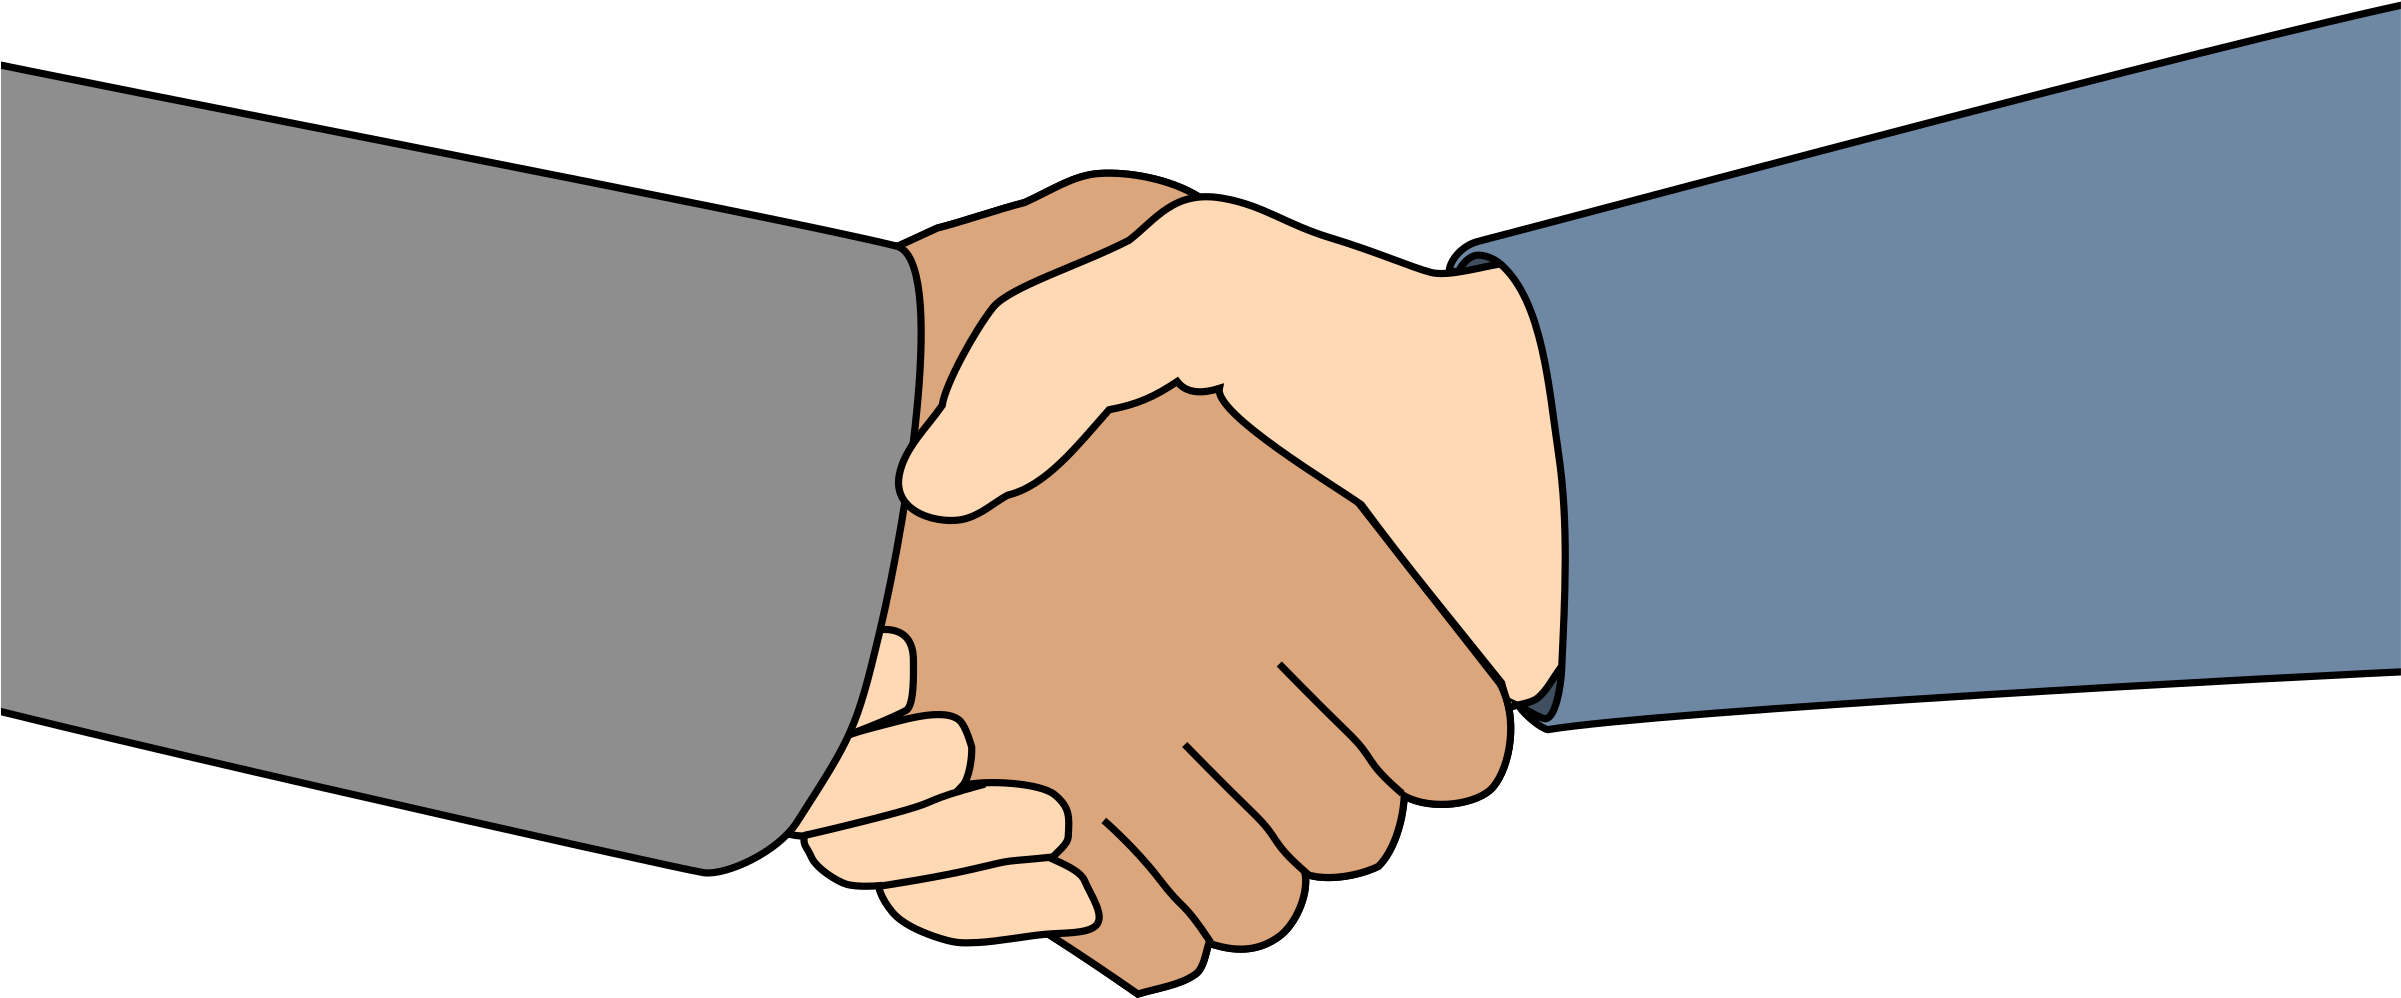 Tags For Help - People Shaking Hands Clip Art (2400x1010)